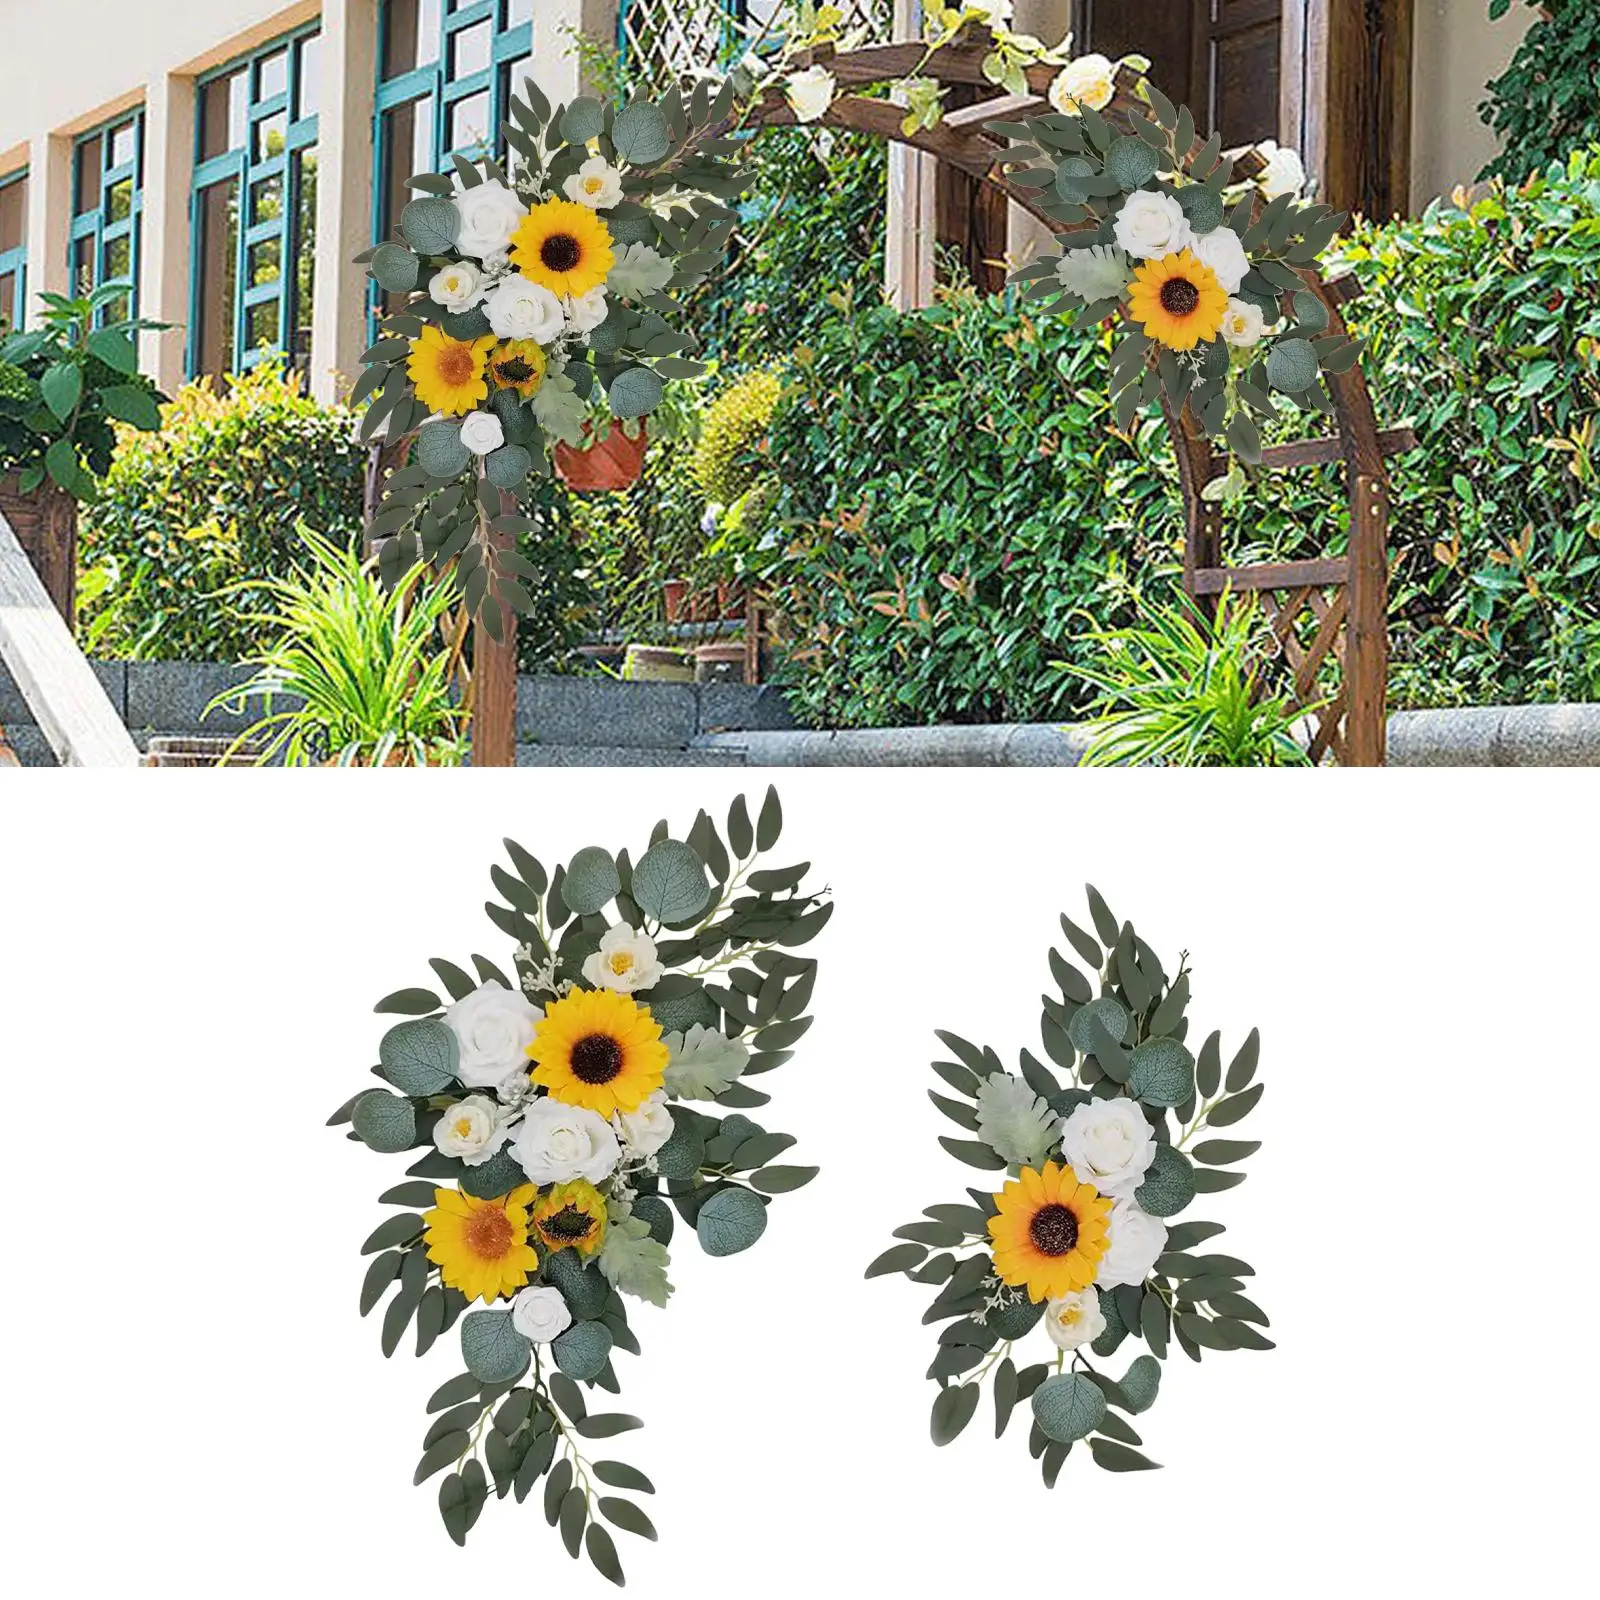 2x Wedding Arch Flowers Sunflowers Decor Rustic Flower Garland Display Fake Plant for Wall Lintel Reception Ceremony Home